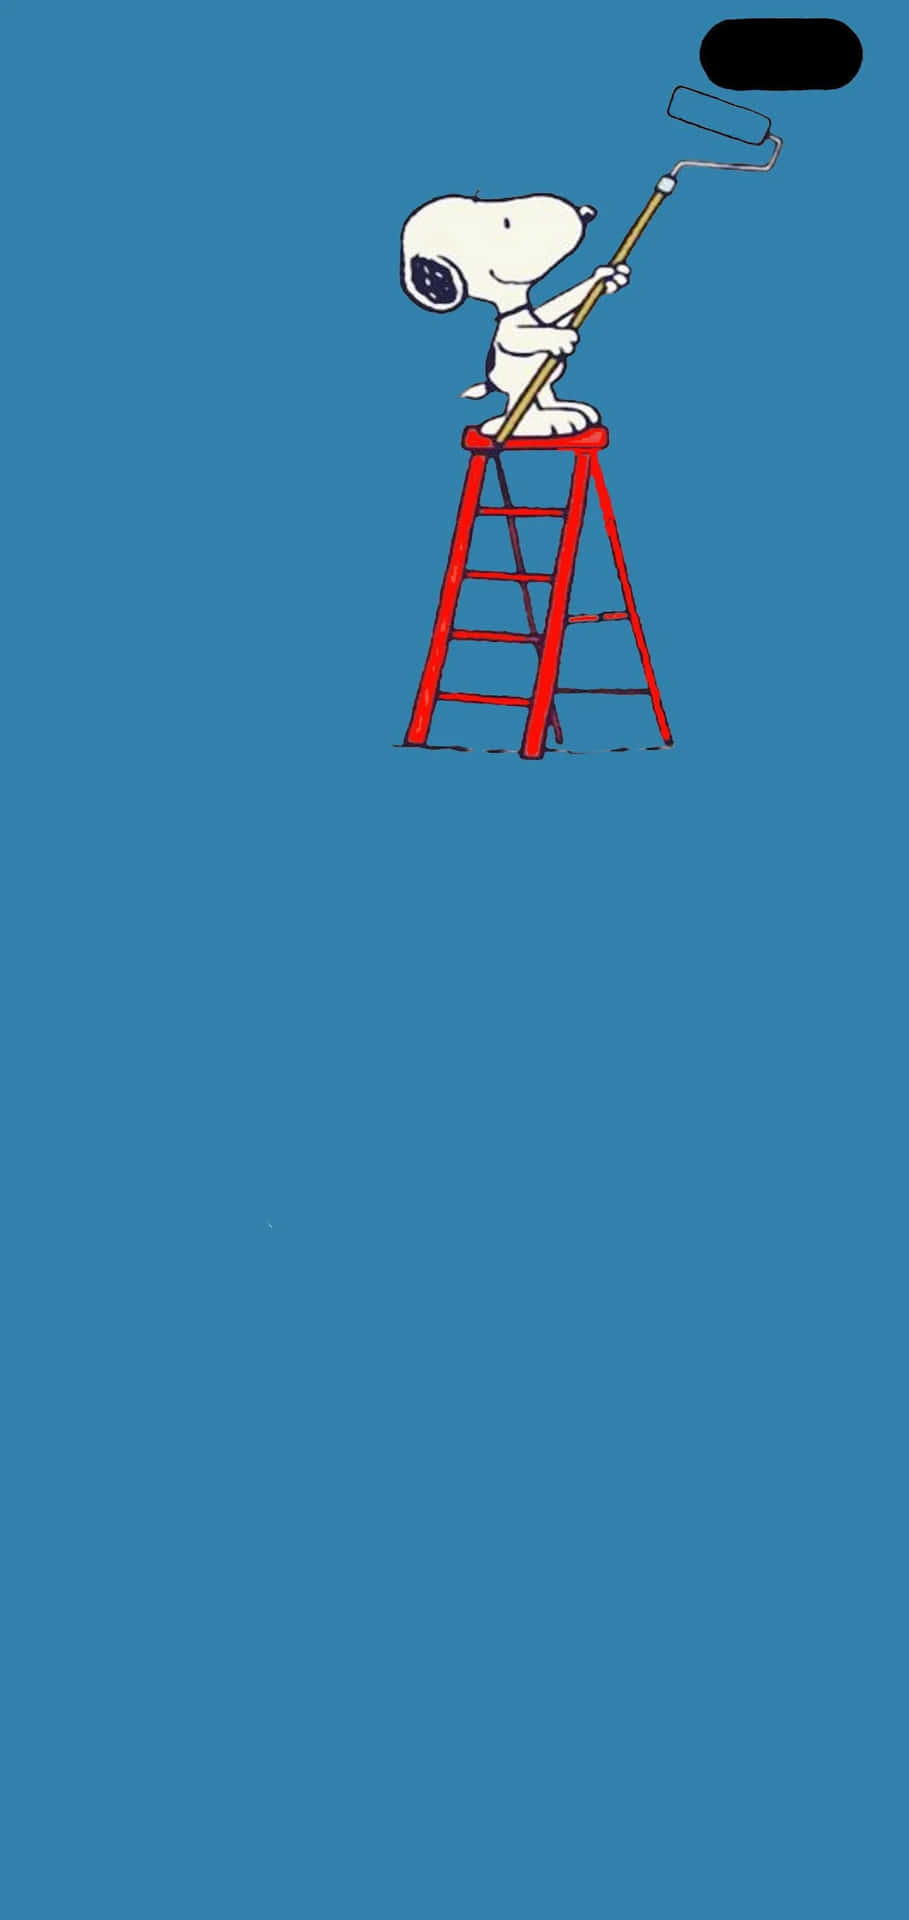 Snoopy On A Ladder With A Fishing Pole